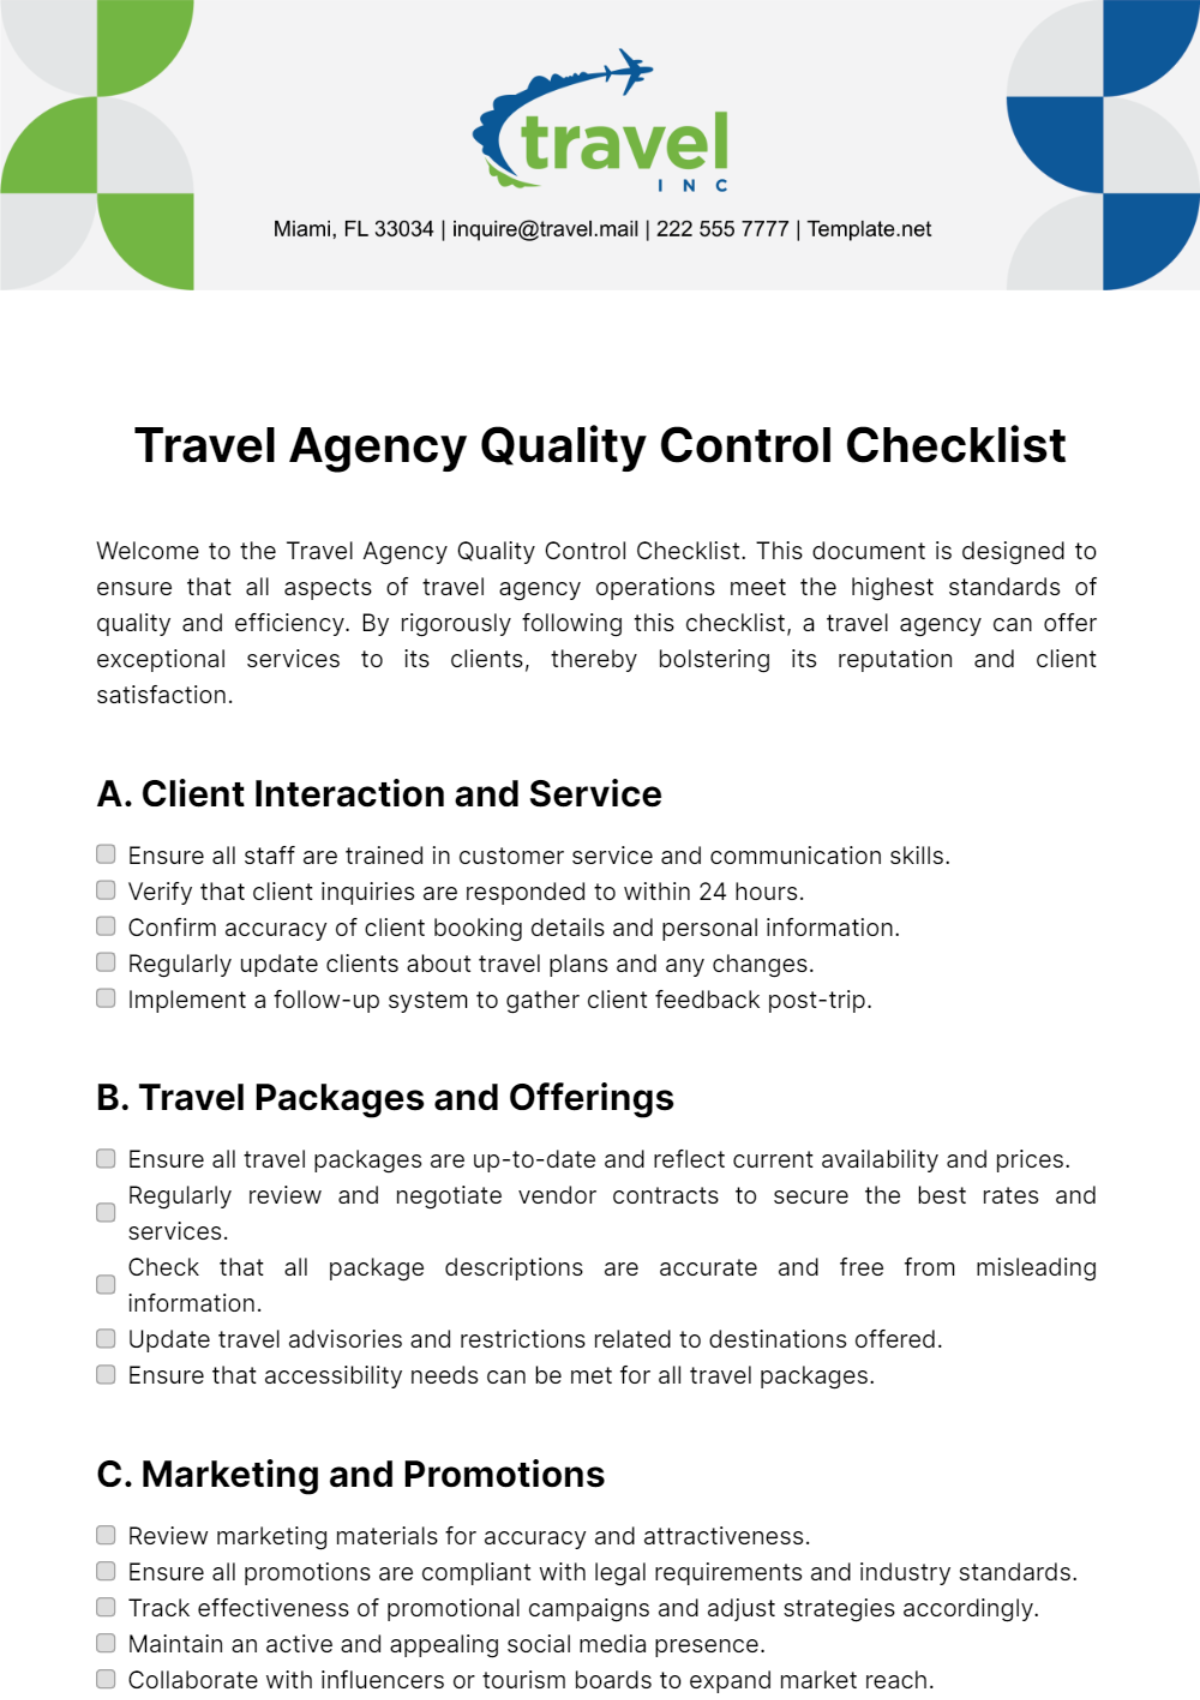 Travel Agency Quality Control Checklist Template